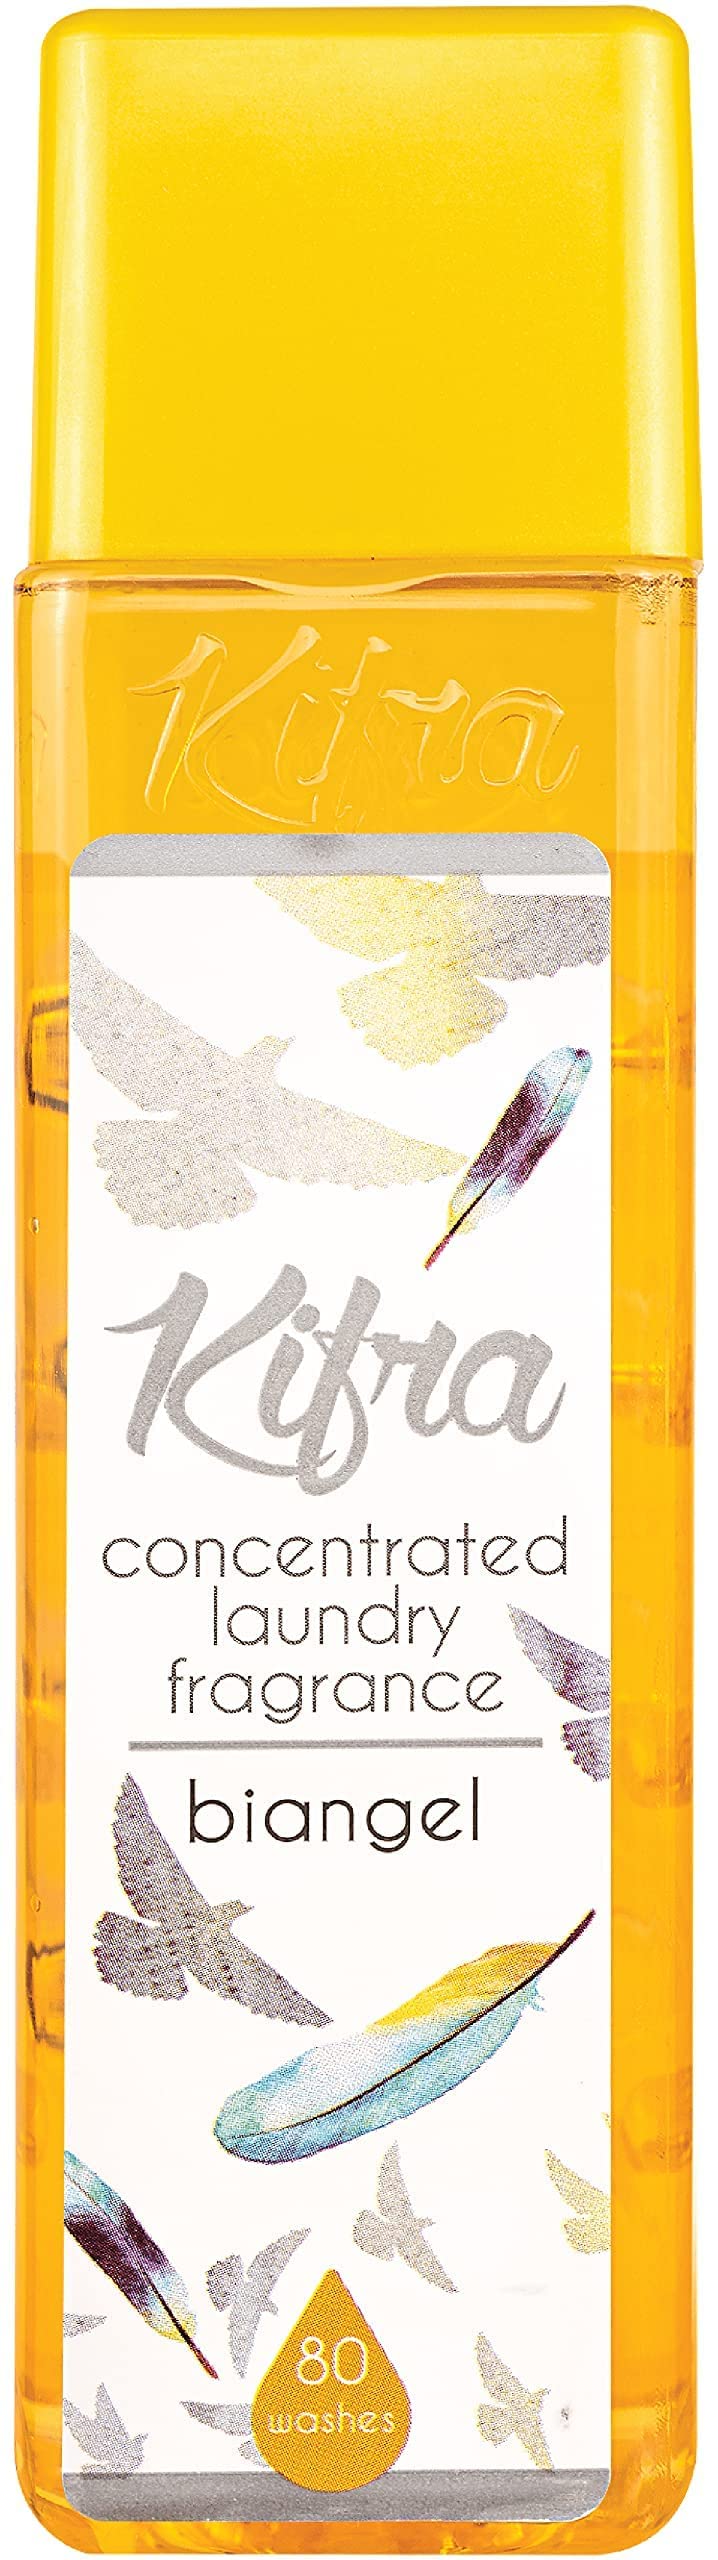 KIFRA BIANGEL Concentrated Laundry Fragrance 200ml 80 Washing Cycles